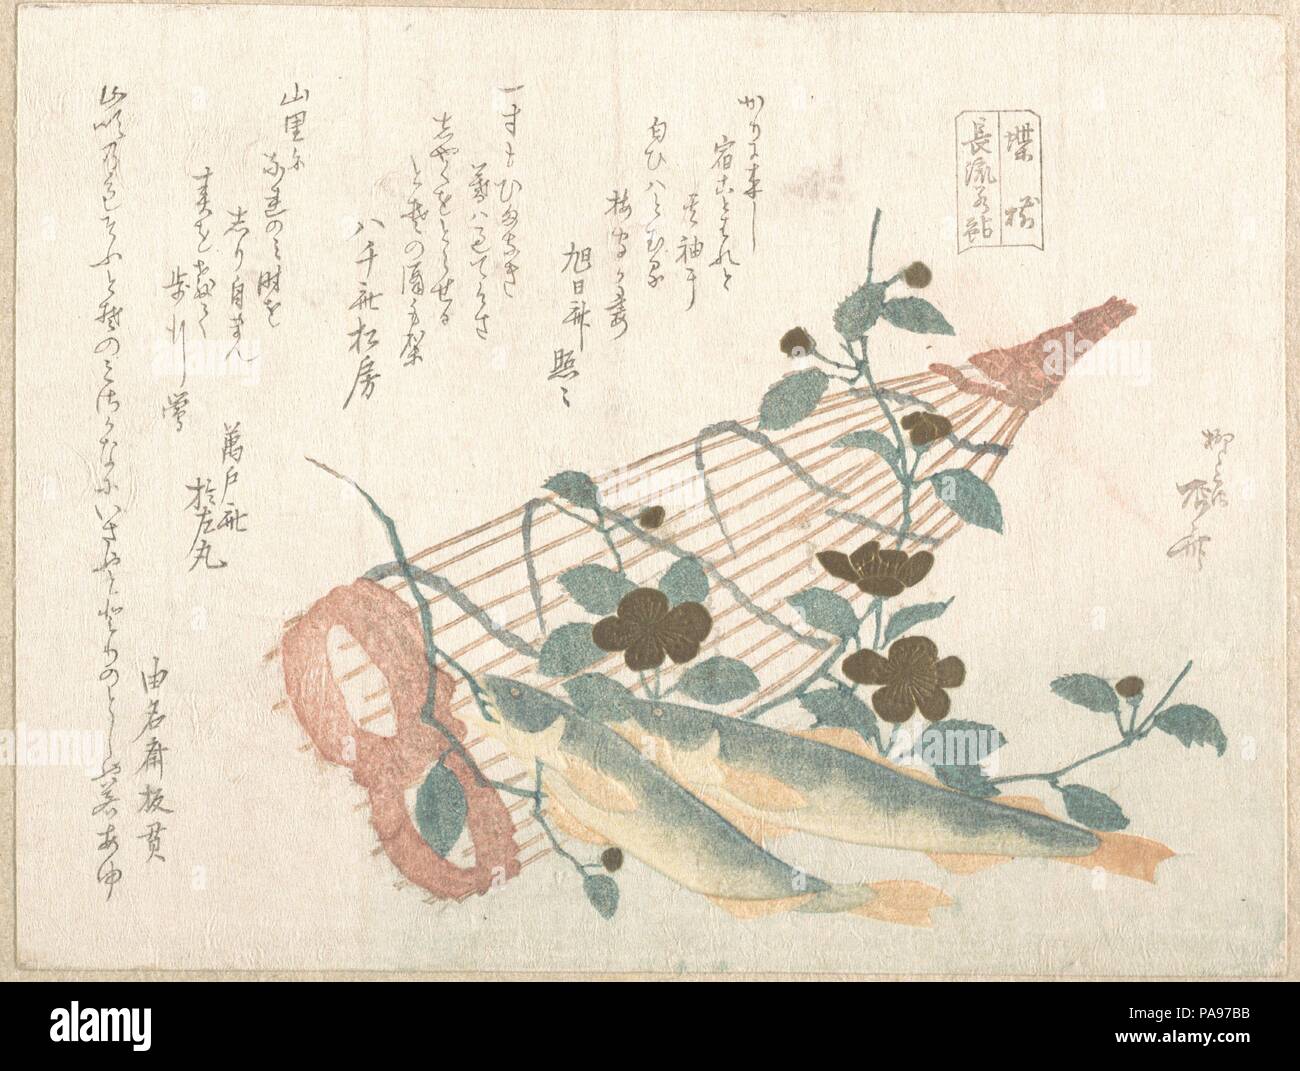 Sweet Fishes of the Nagara River, with Baskets and Flowers. Artist: Ryuryukyo Shinsai (Japanese, active ca. 1799-1823). Culture: Japan. Dimensions: 5 11/16 x 7 1/2 in. (14.4 x 19.1 cm). Date: 19th century. Museum: Metropolitan Museum of Art, New York, USA. Stock Photo